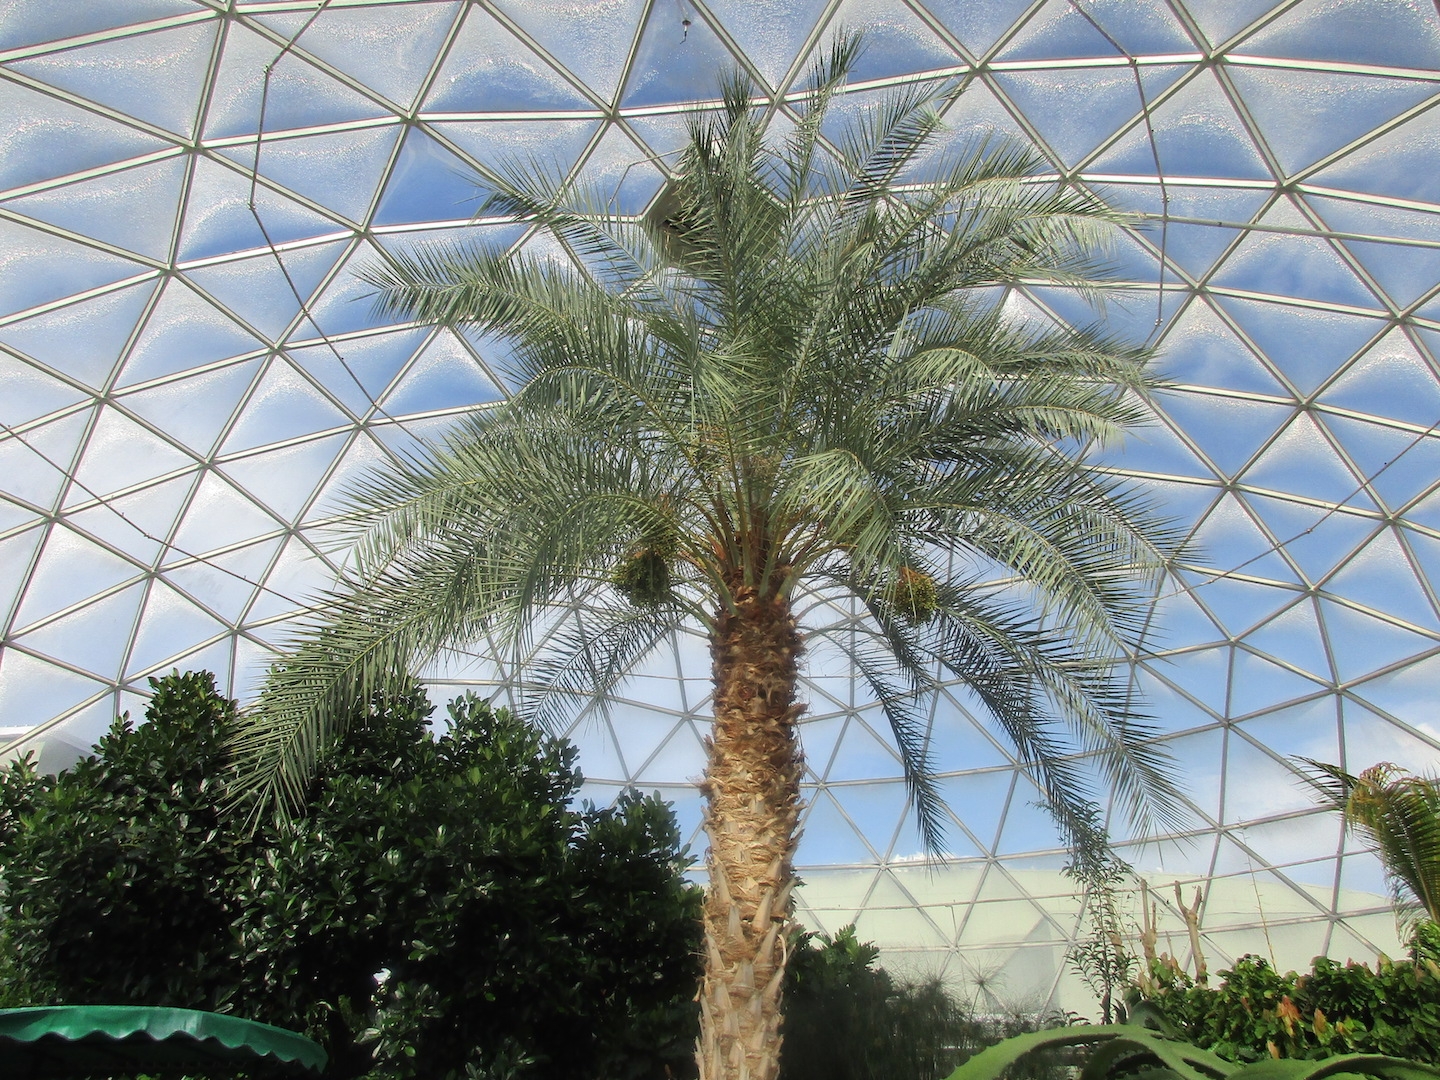 Epcot’s Behind the Seeds Tour: You Can Learn to Live With the Land